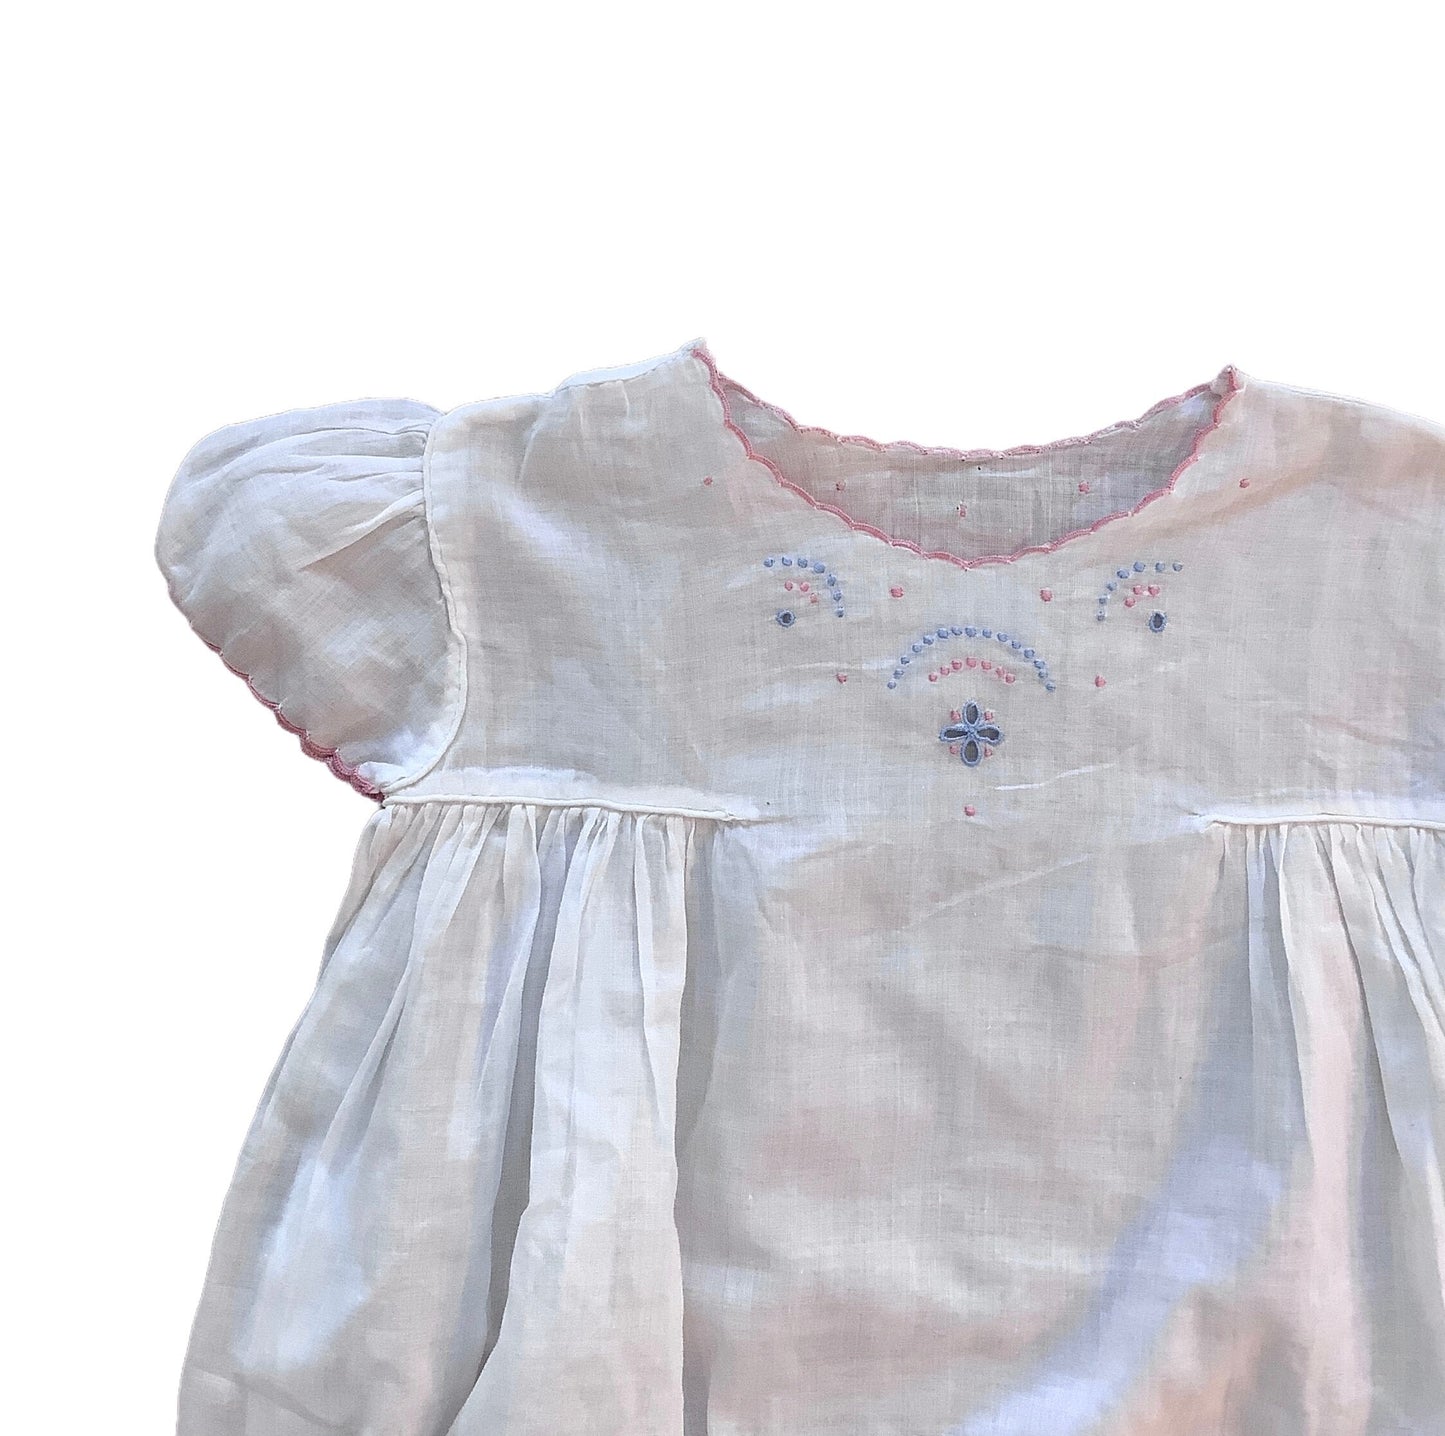 Vintage 60's Lightweight Delicately Embroidered White Dress 12-18M